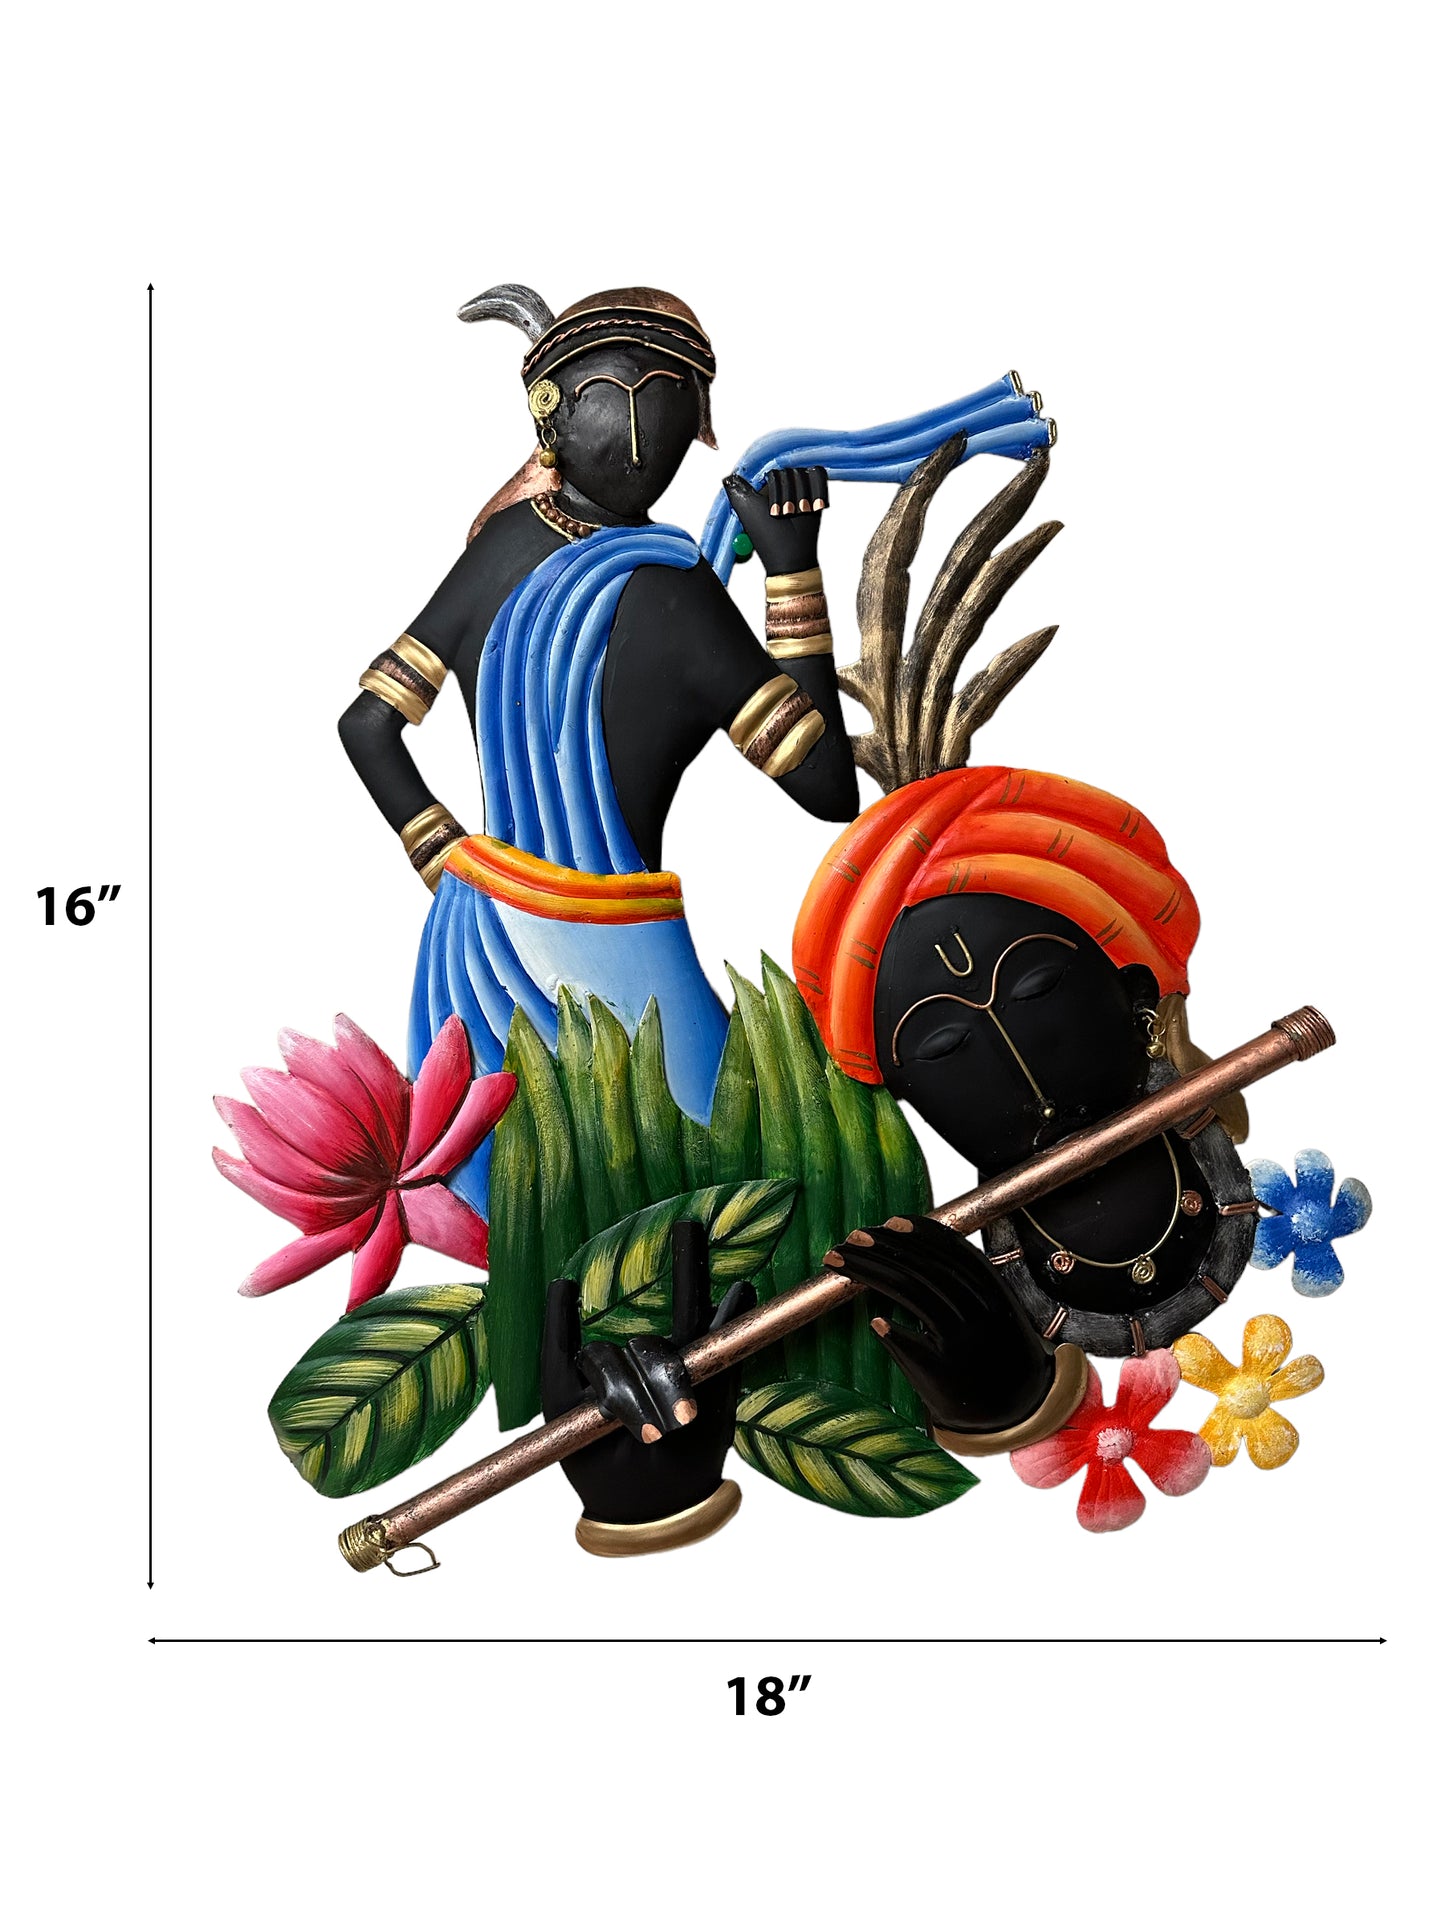 Artistic Intricately Crafted Metal Wall Decor Of Figurine Playing Flute / Ruchi